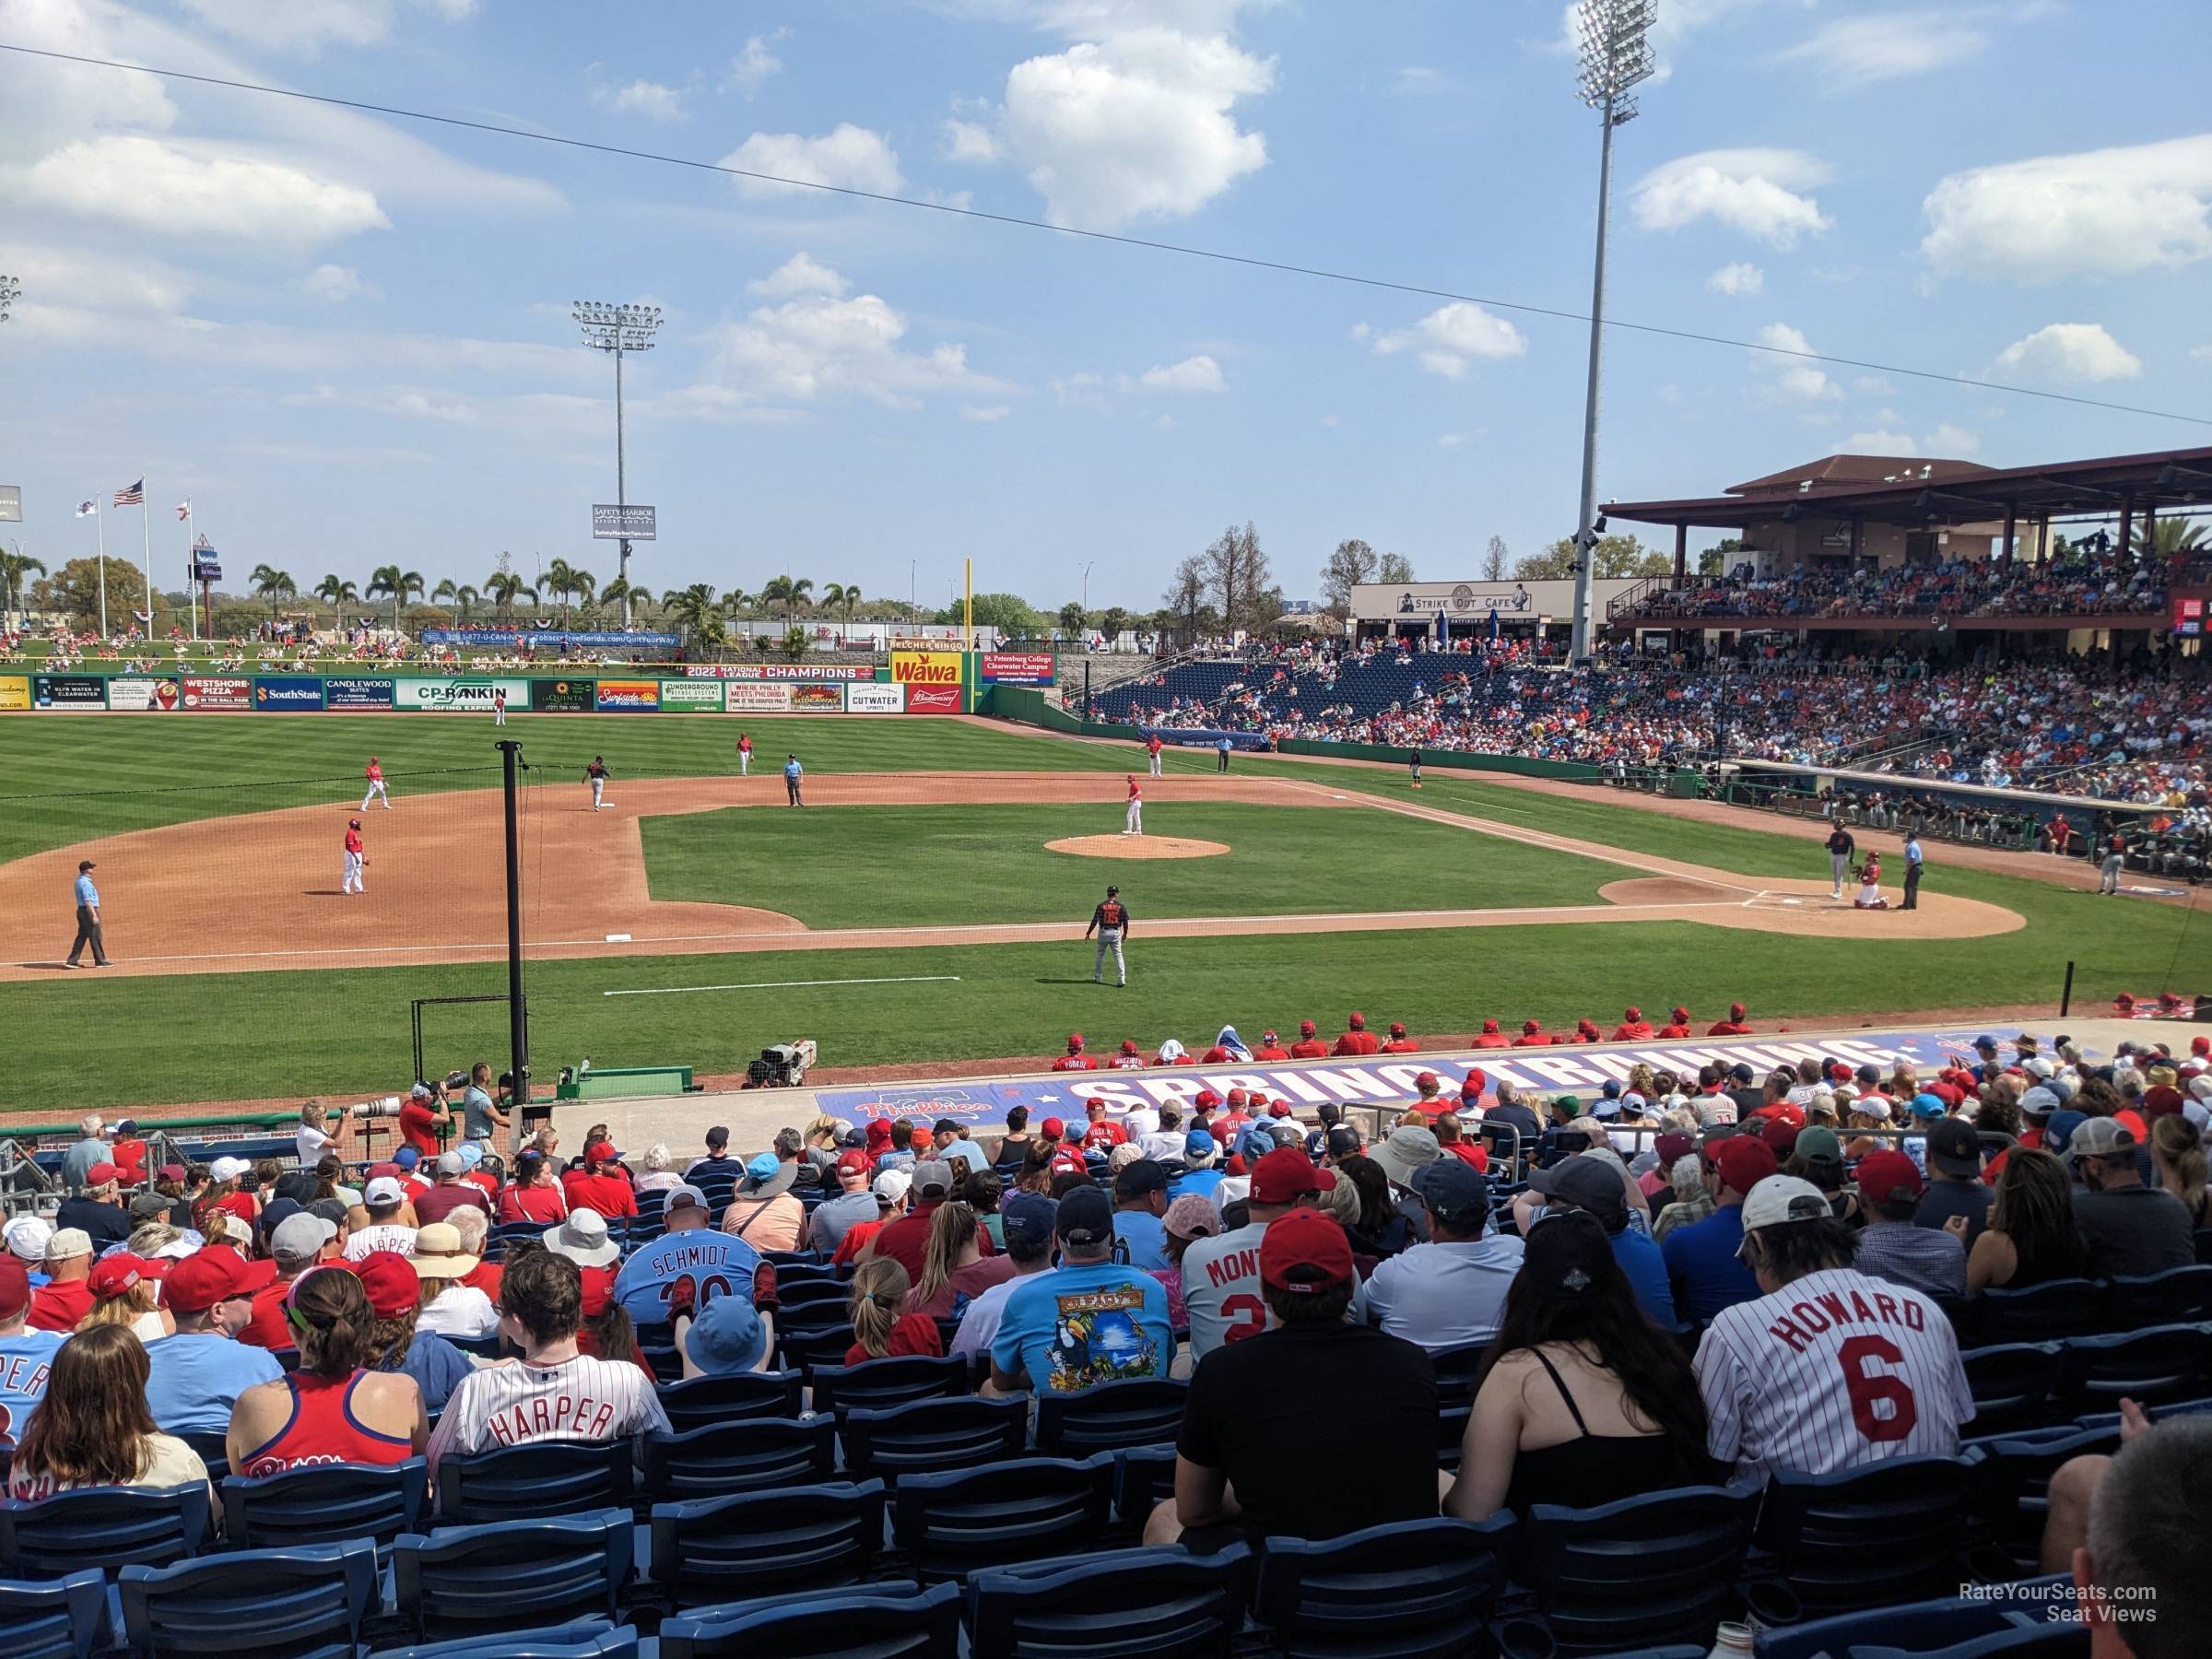 section 116, row 23 seat view  - baycare ballpark